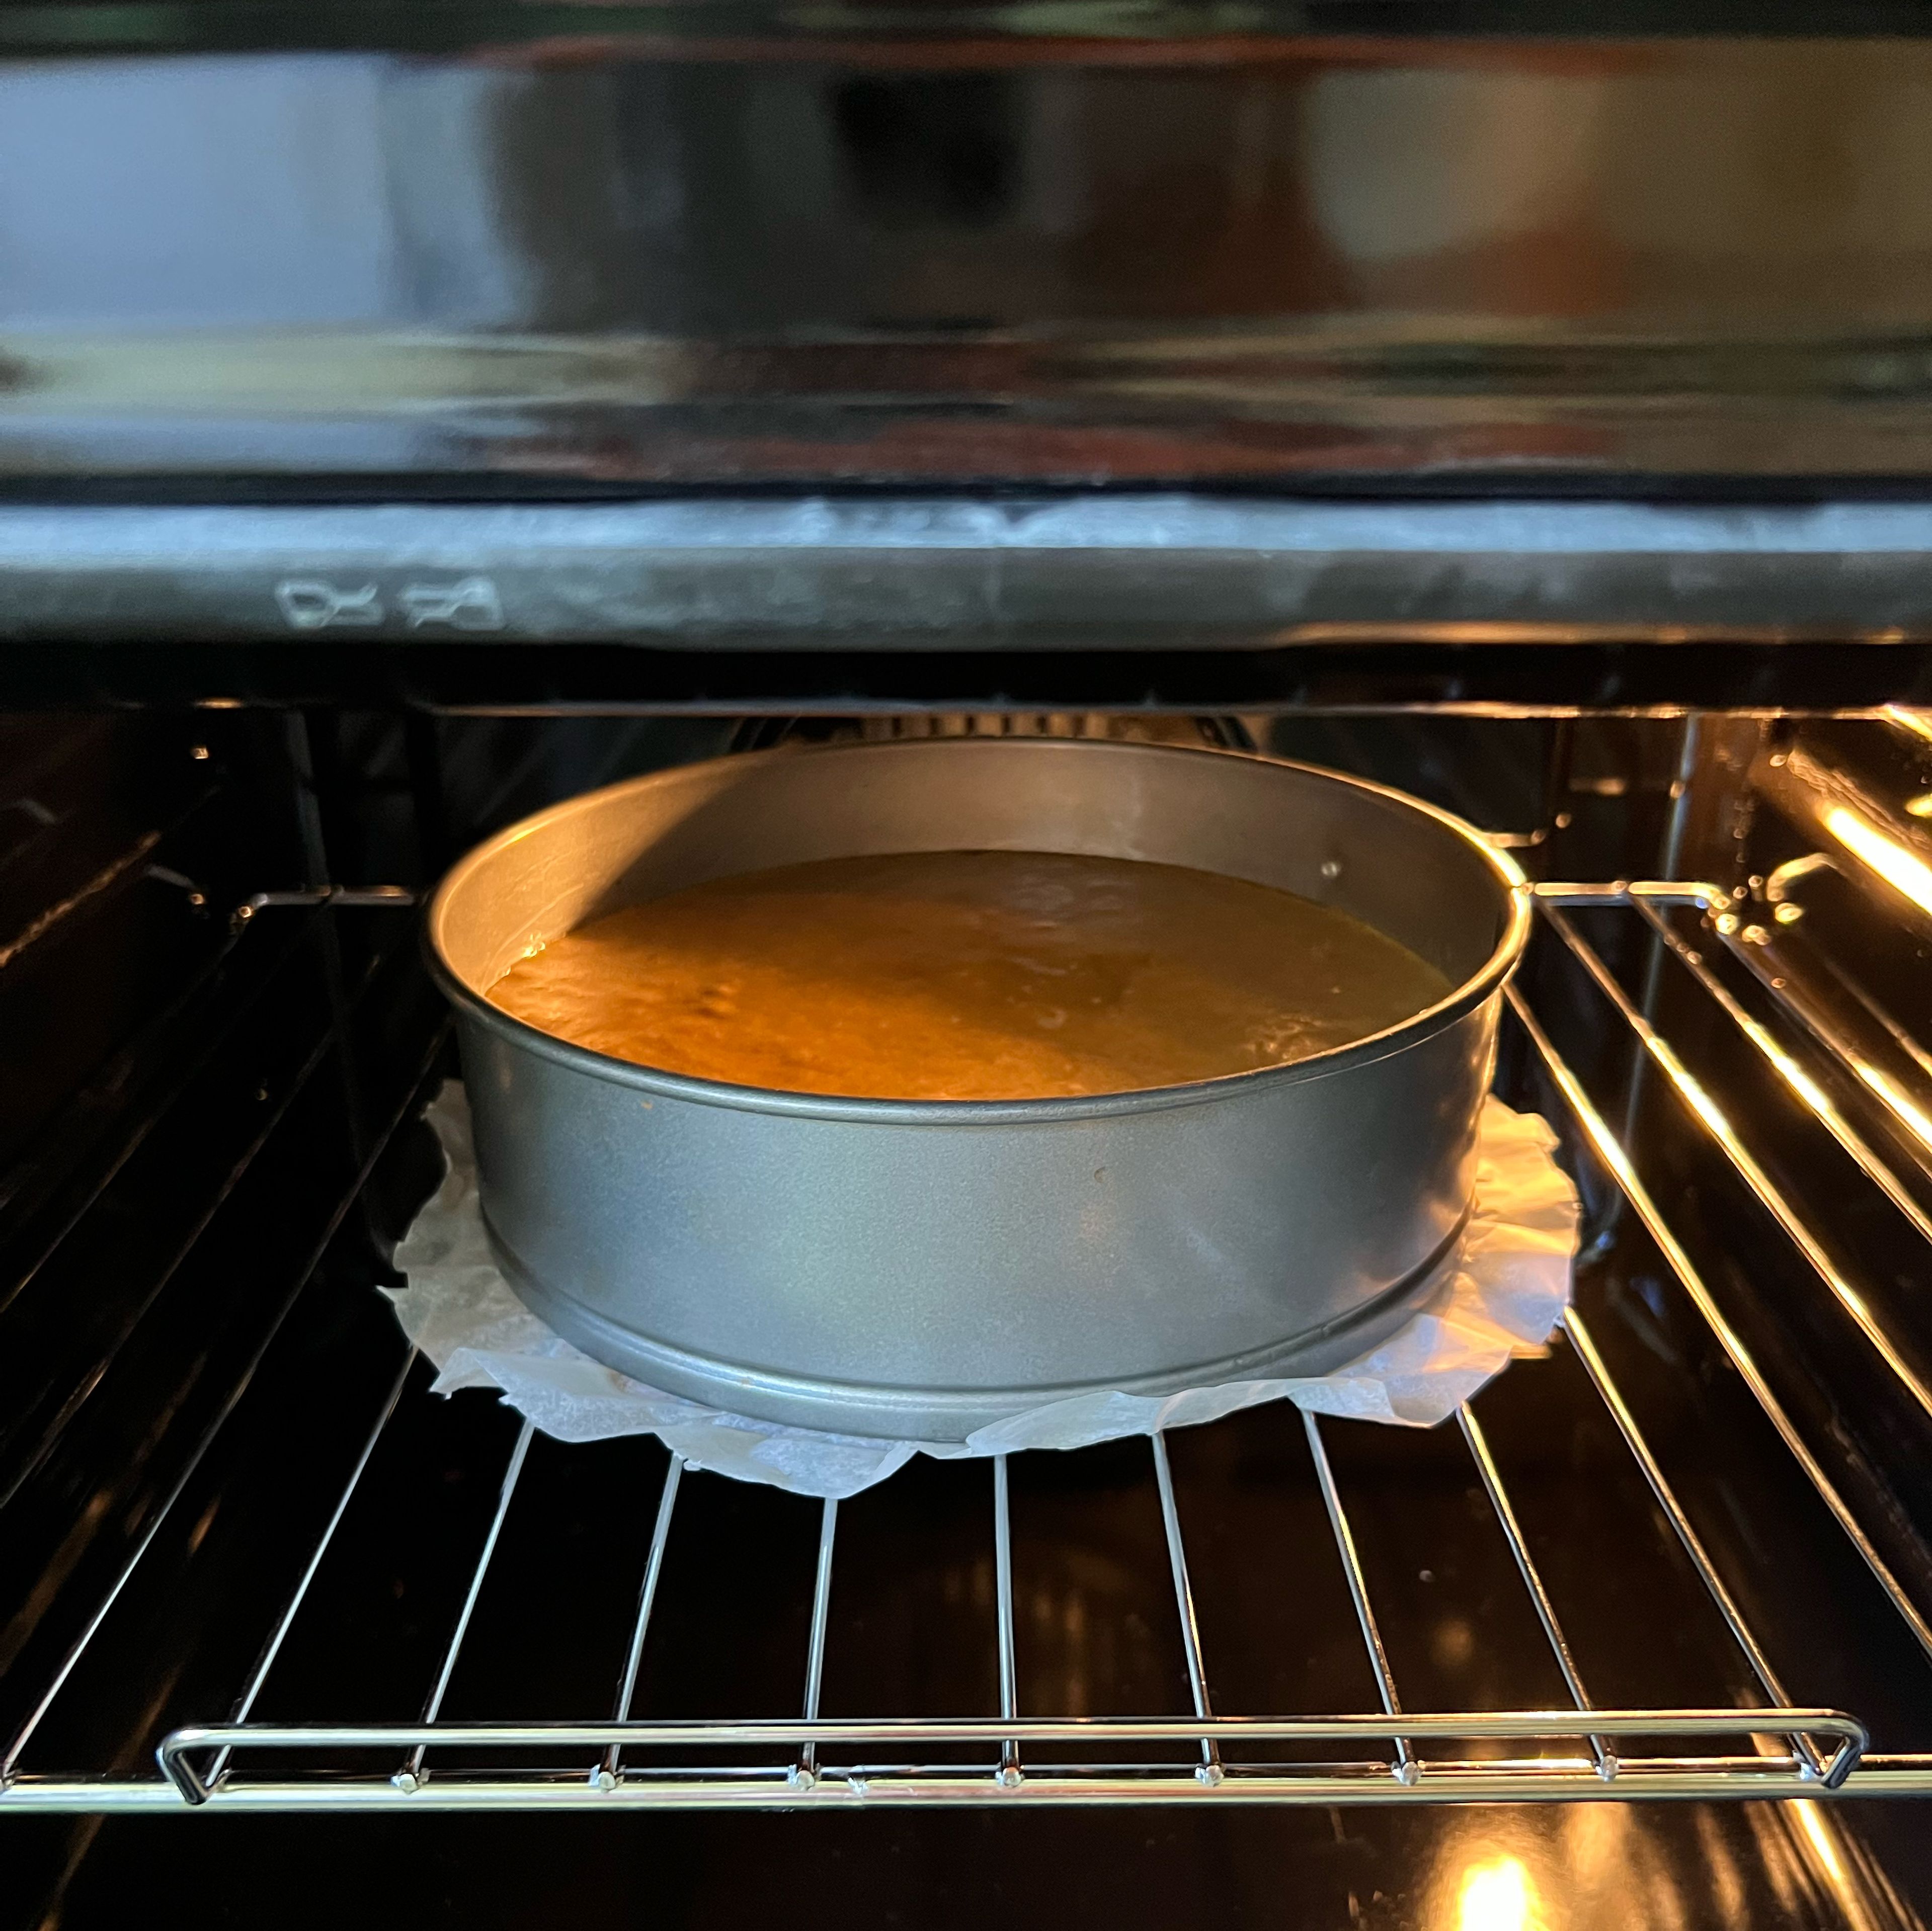 Put the pan into the preheated oven 180°C for about 35-40 min. You can check the dough with a toothpick if it's ready or not. 